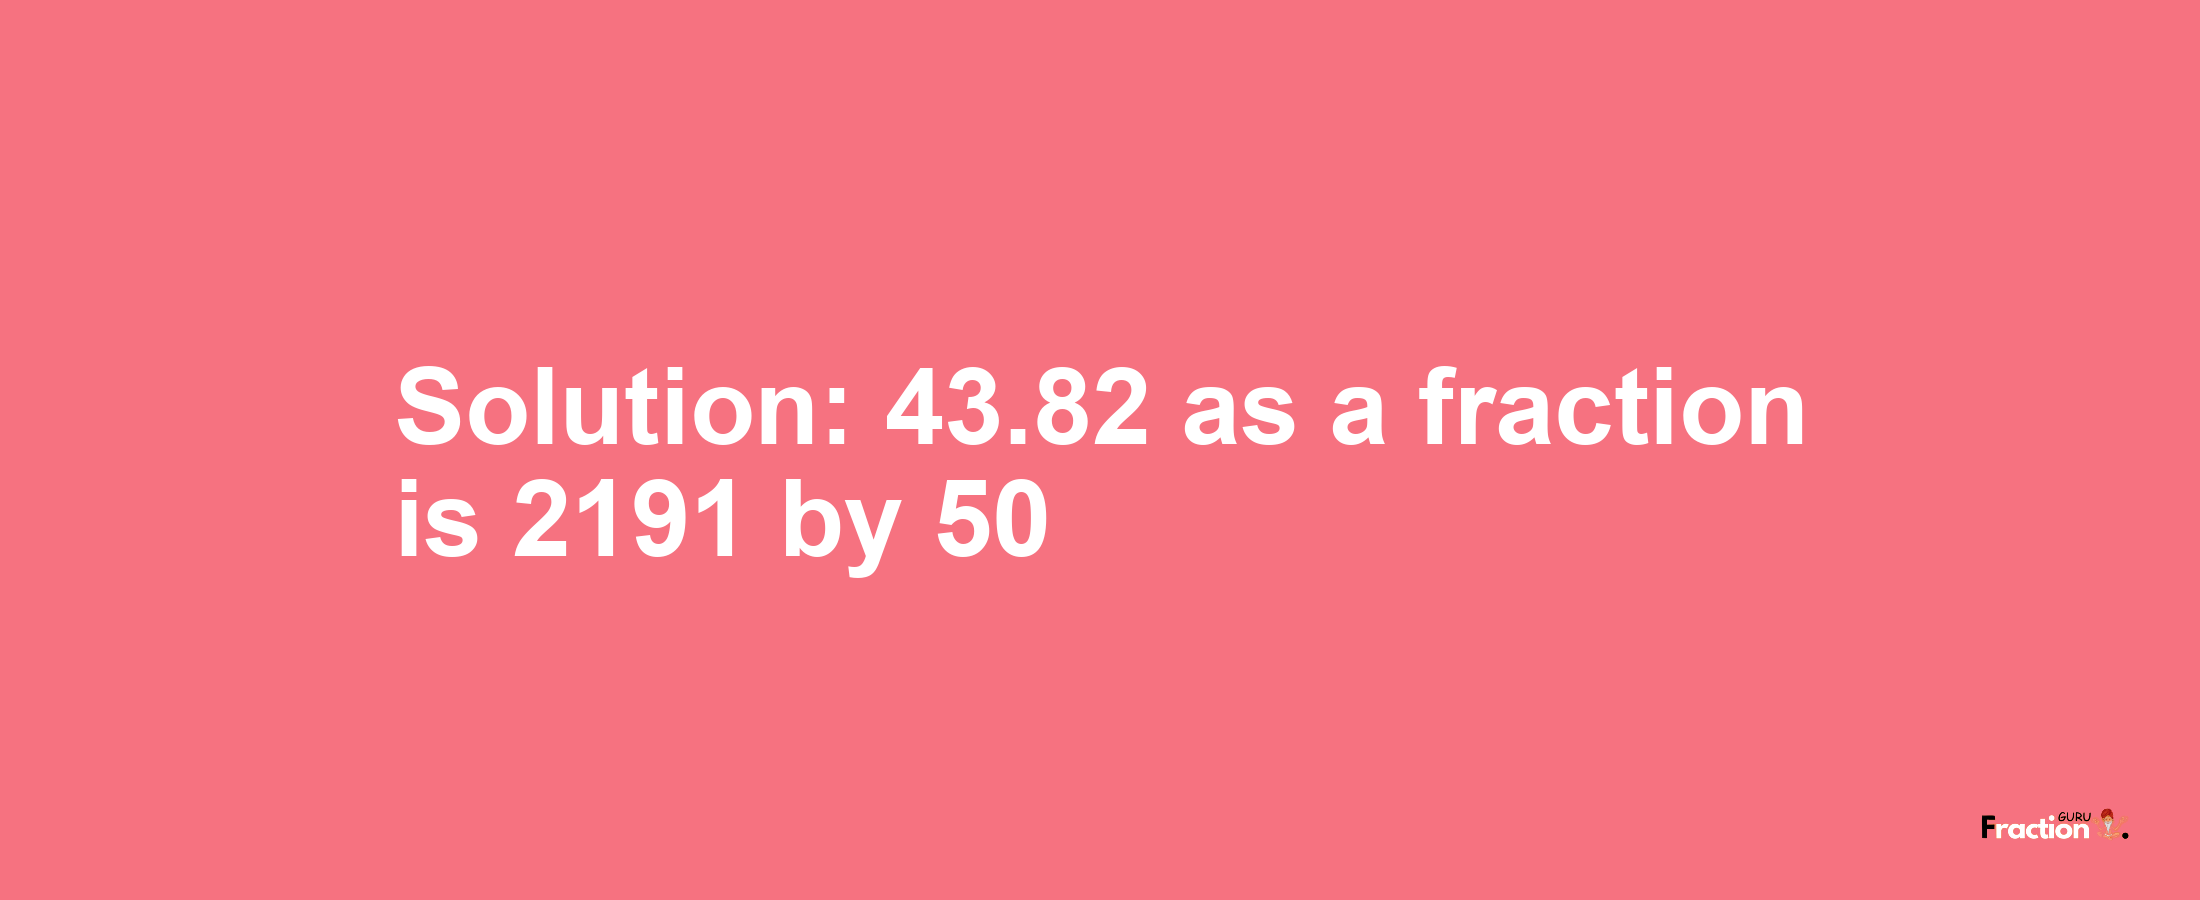 Solution:43.82 as a fraction is 2191/50